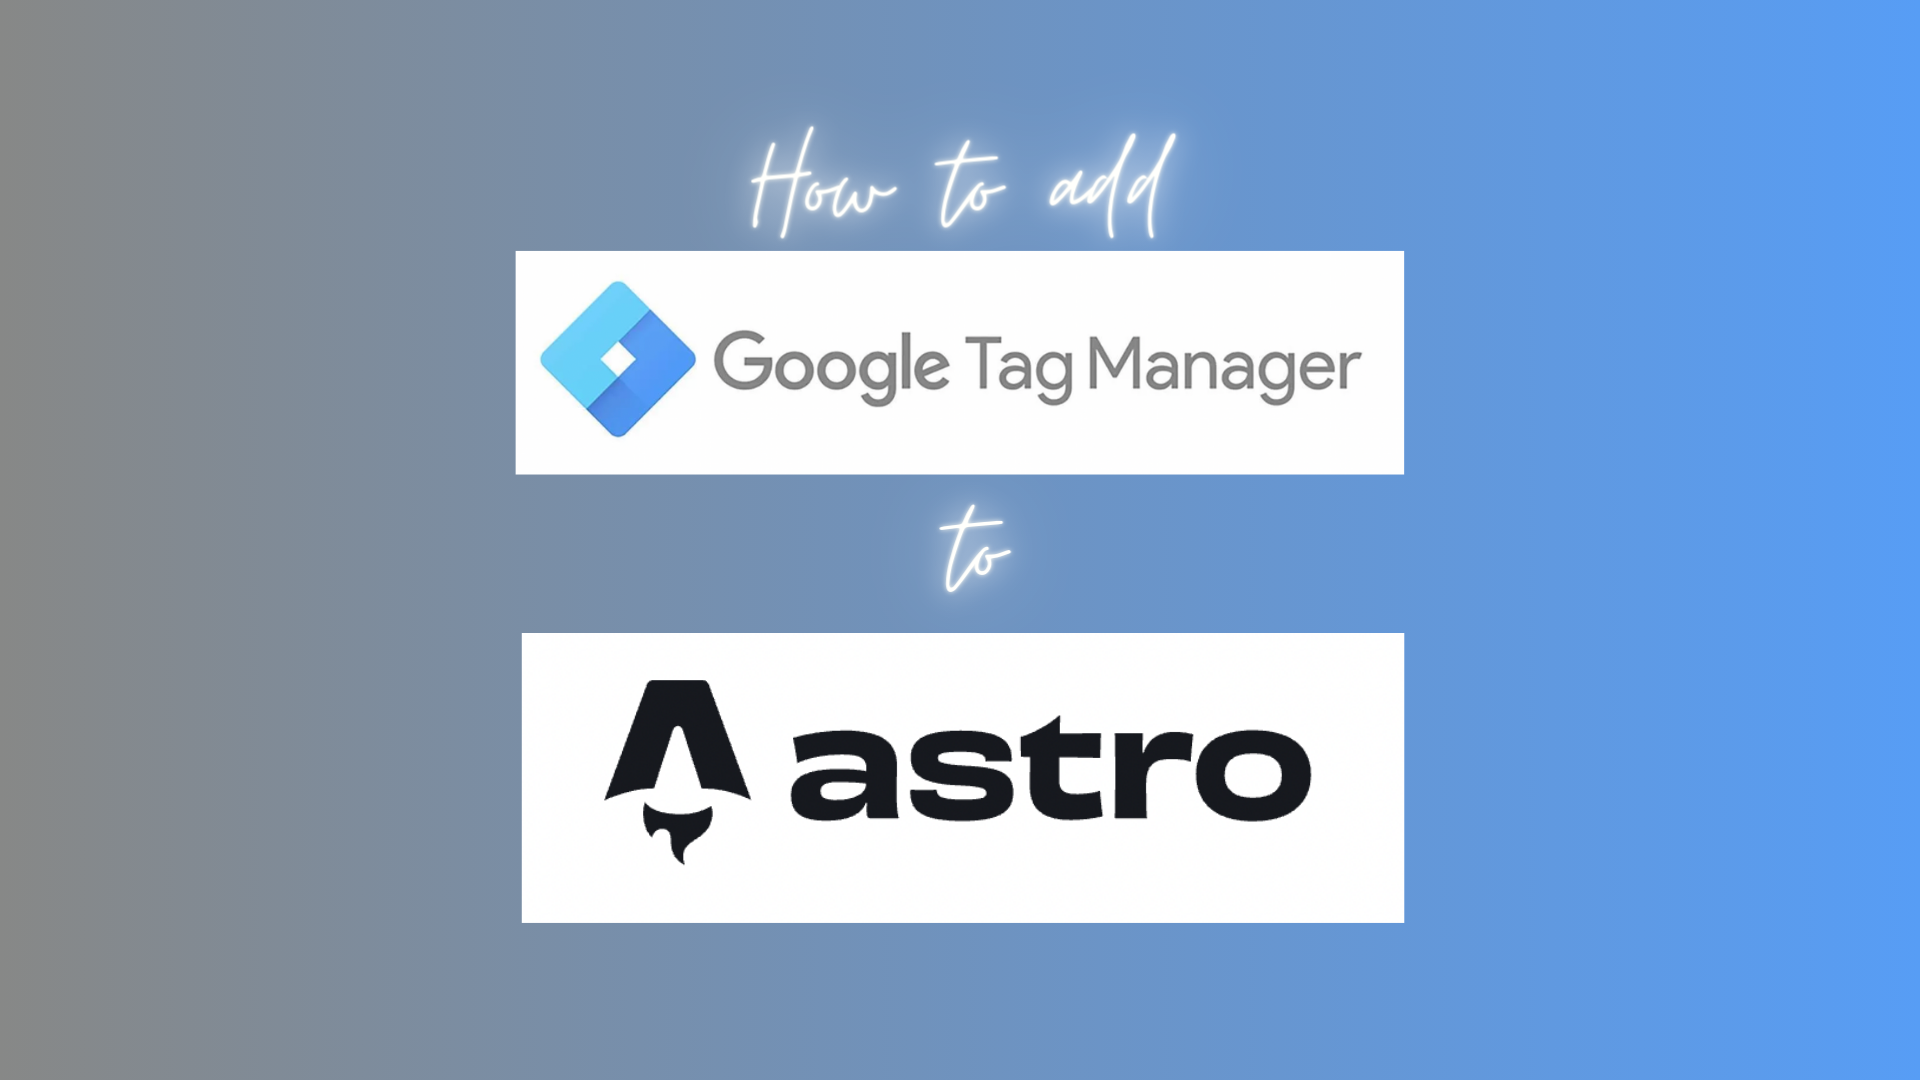 How to add GTM to Astro with logos on a blended blue and grey background.